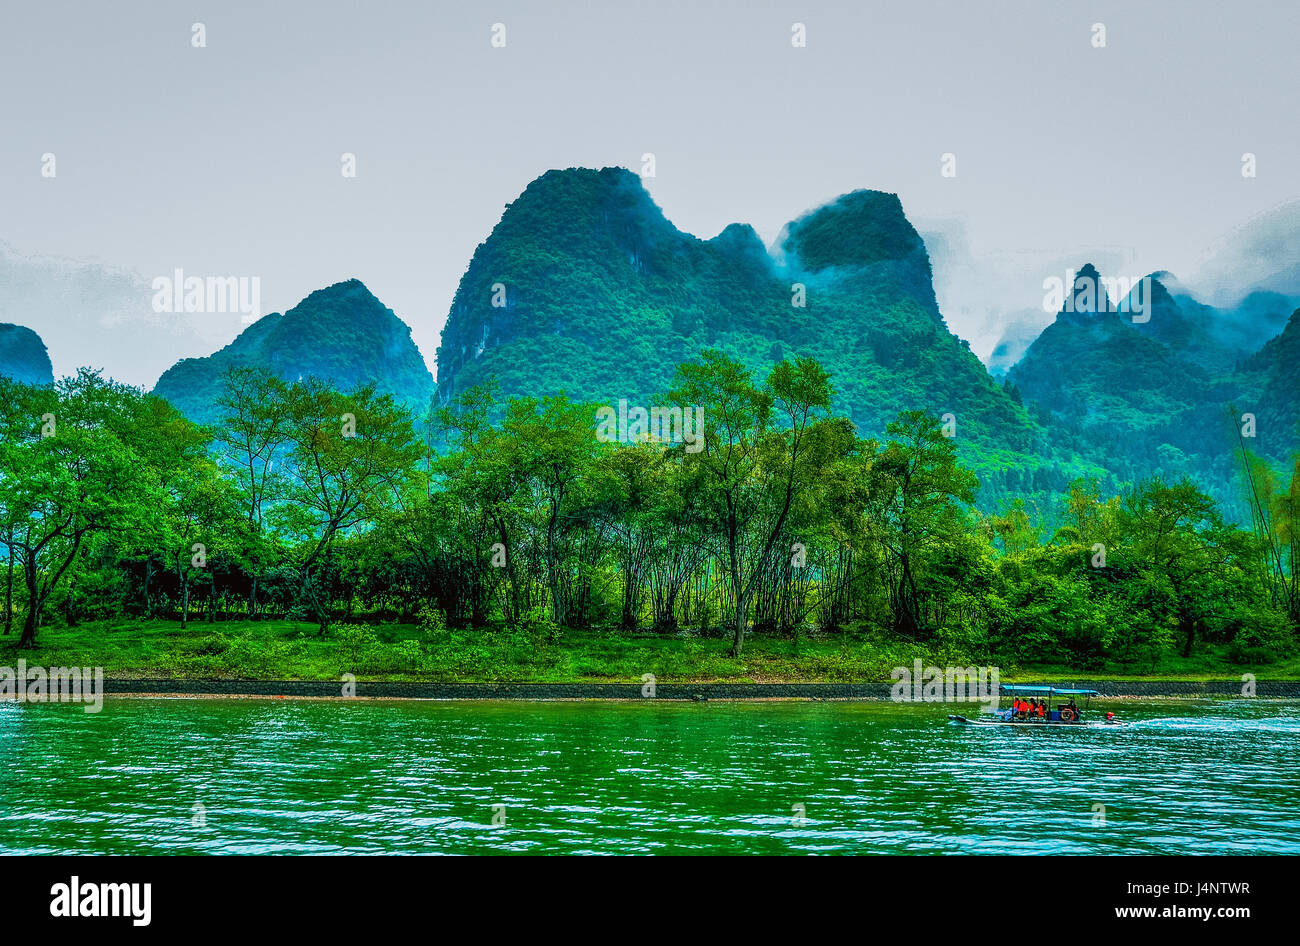 Karst mountains and Li River scenery in the mist Stock Photo